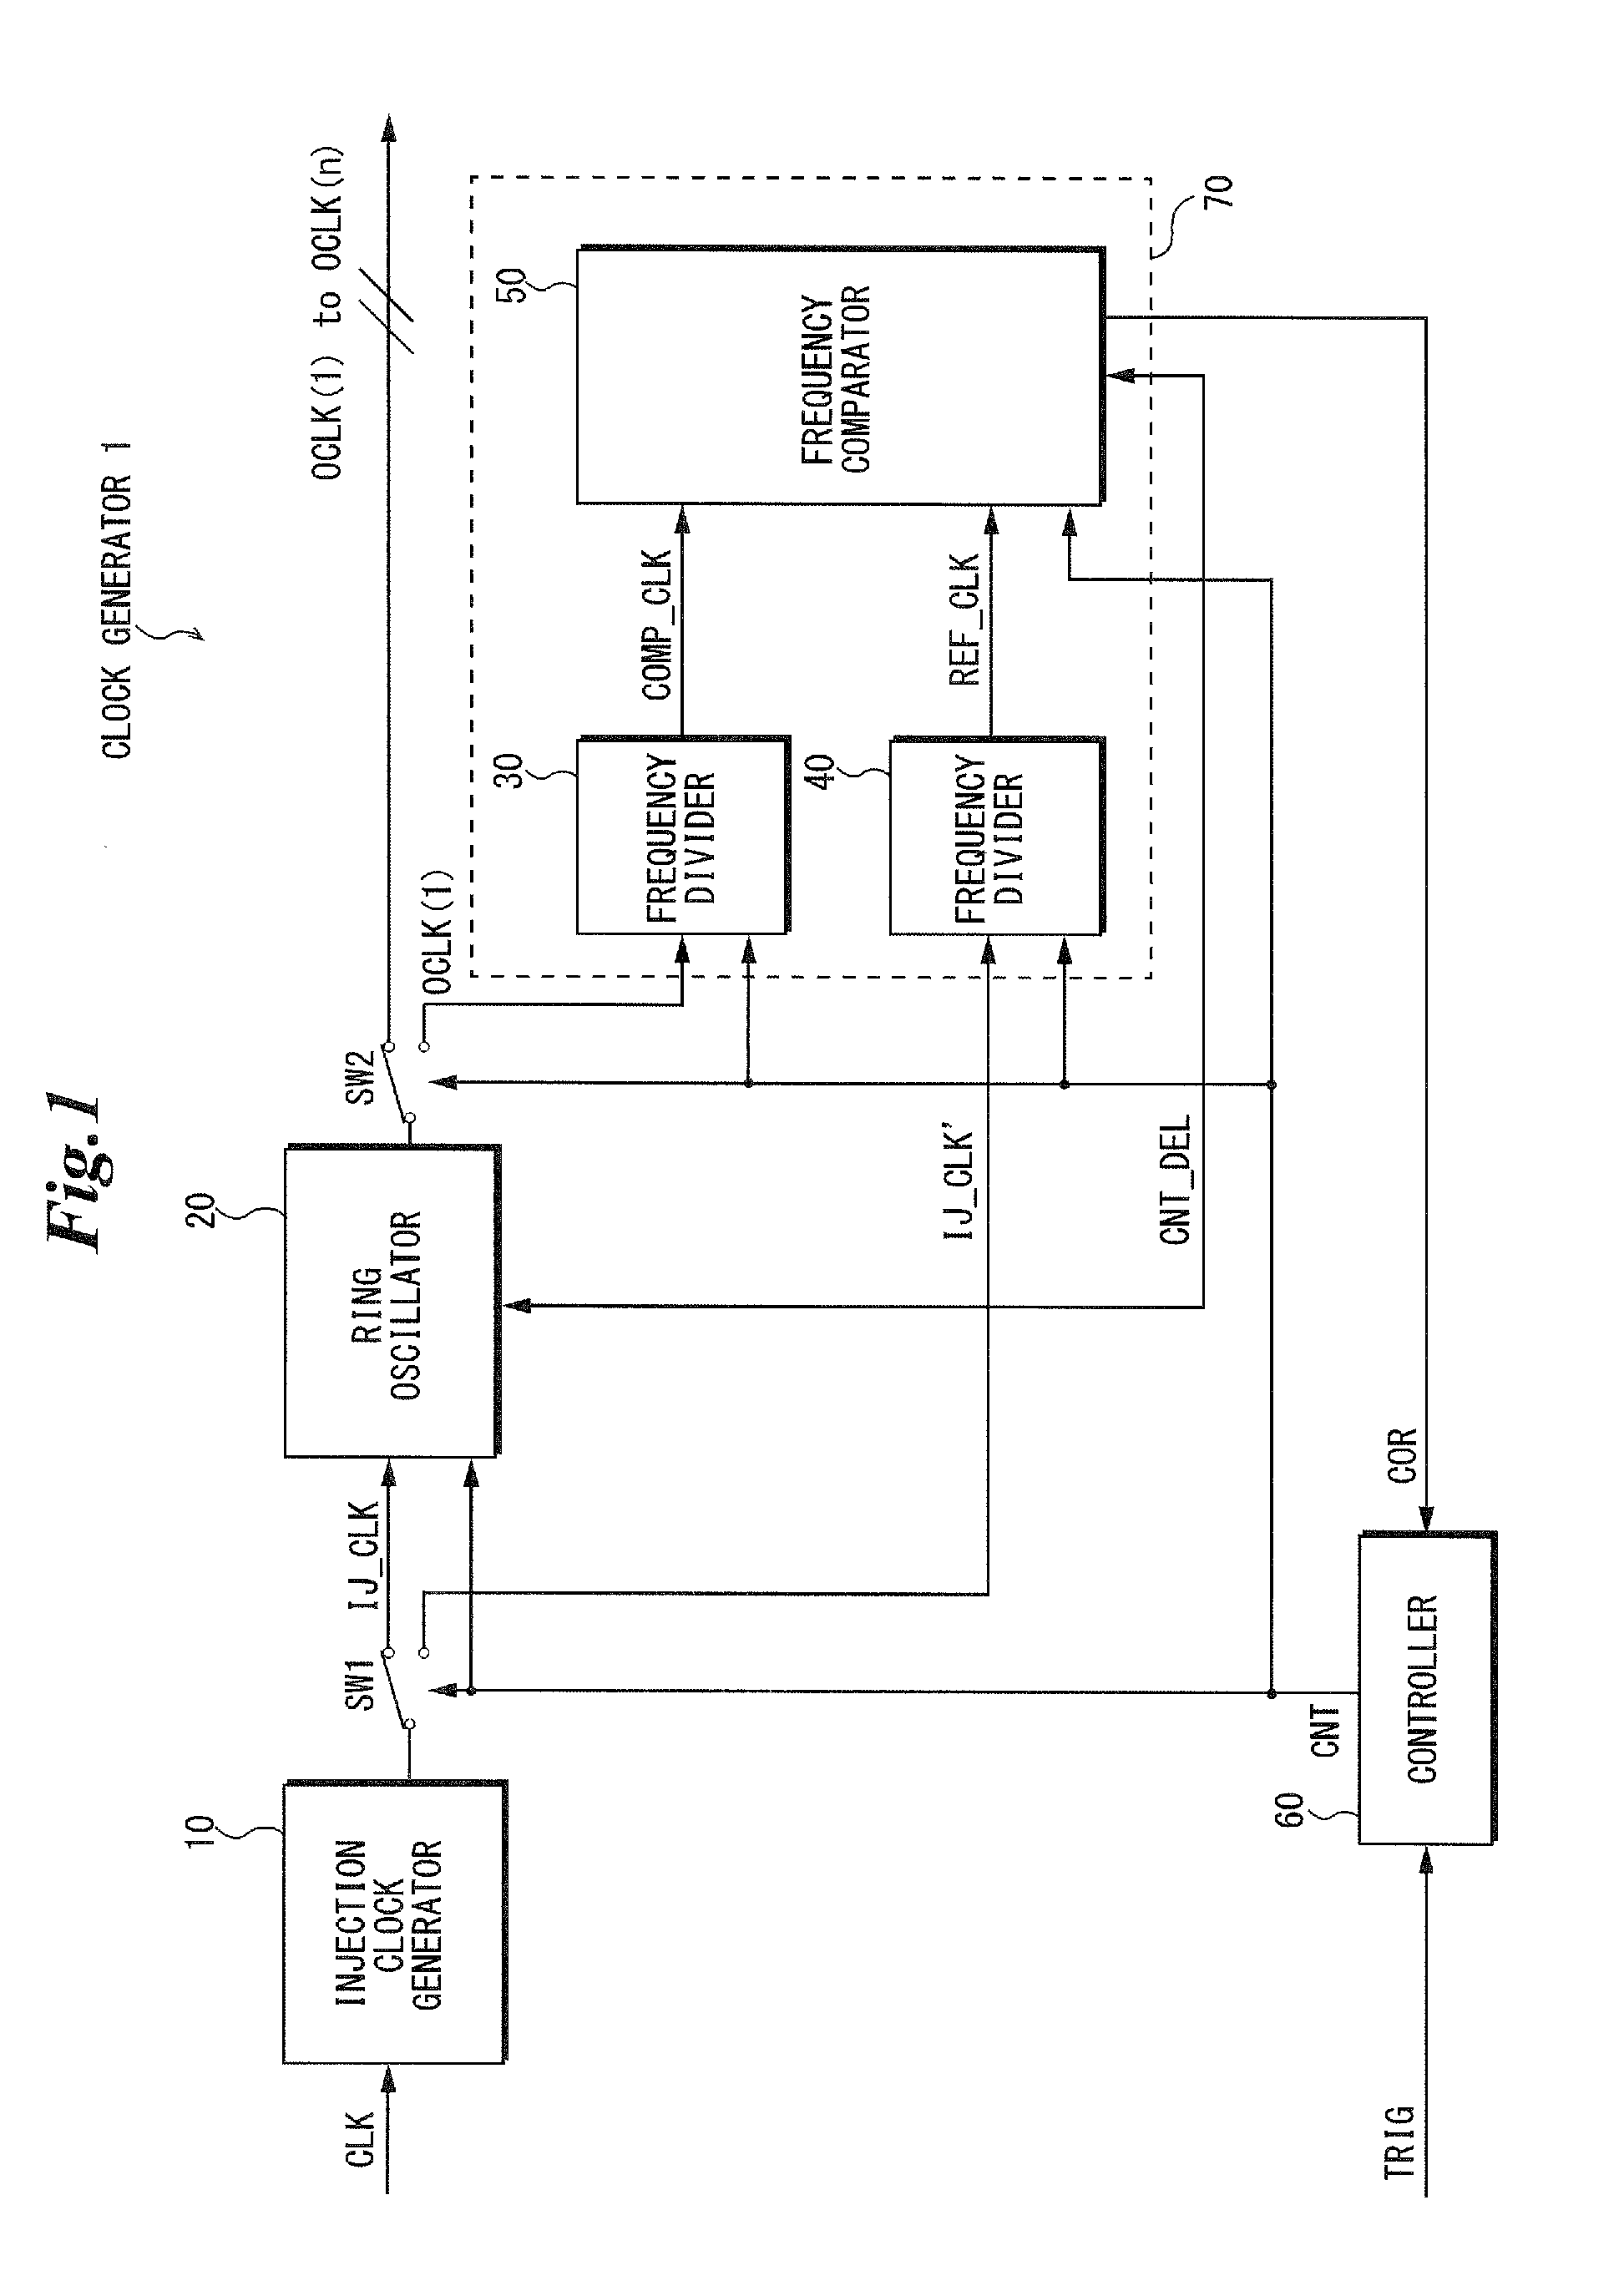 Clock generator and method of adjusting phases of multiphase clocks by the same